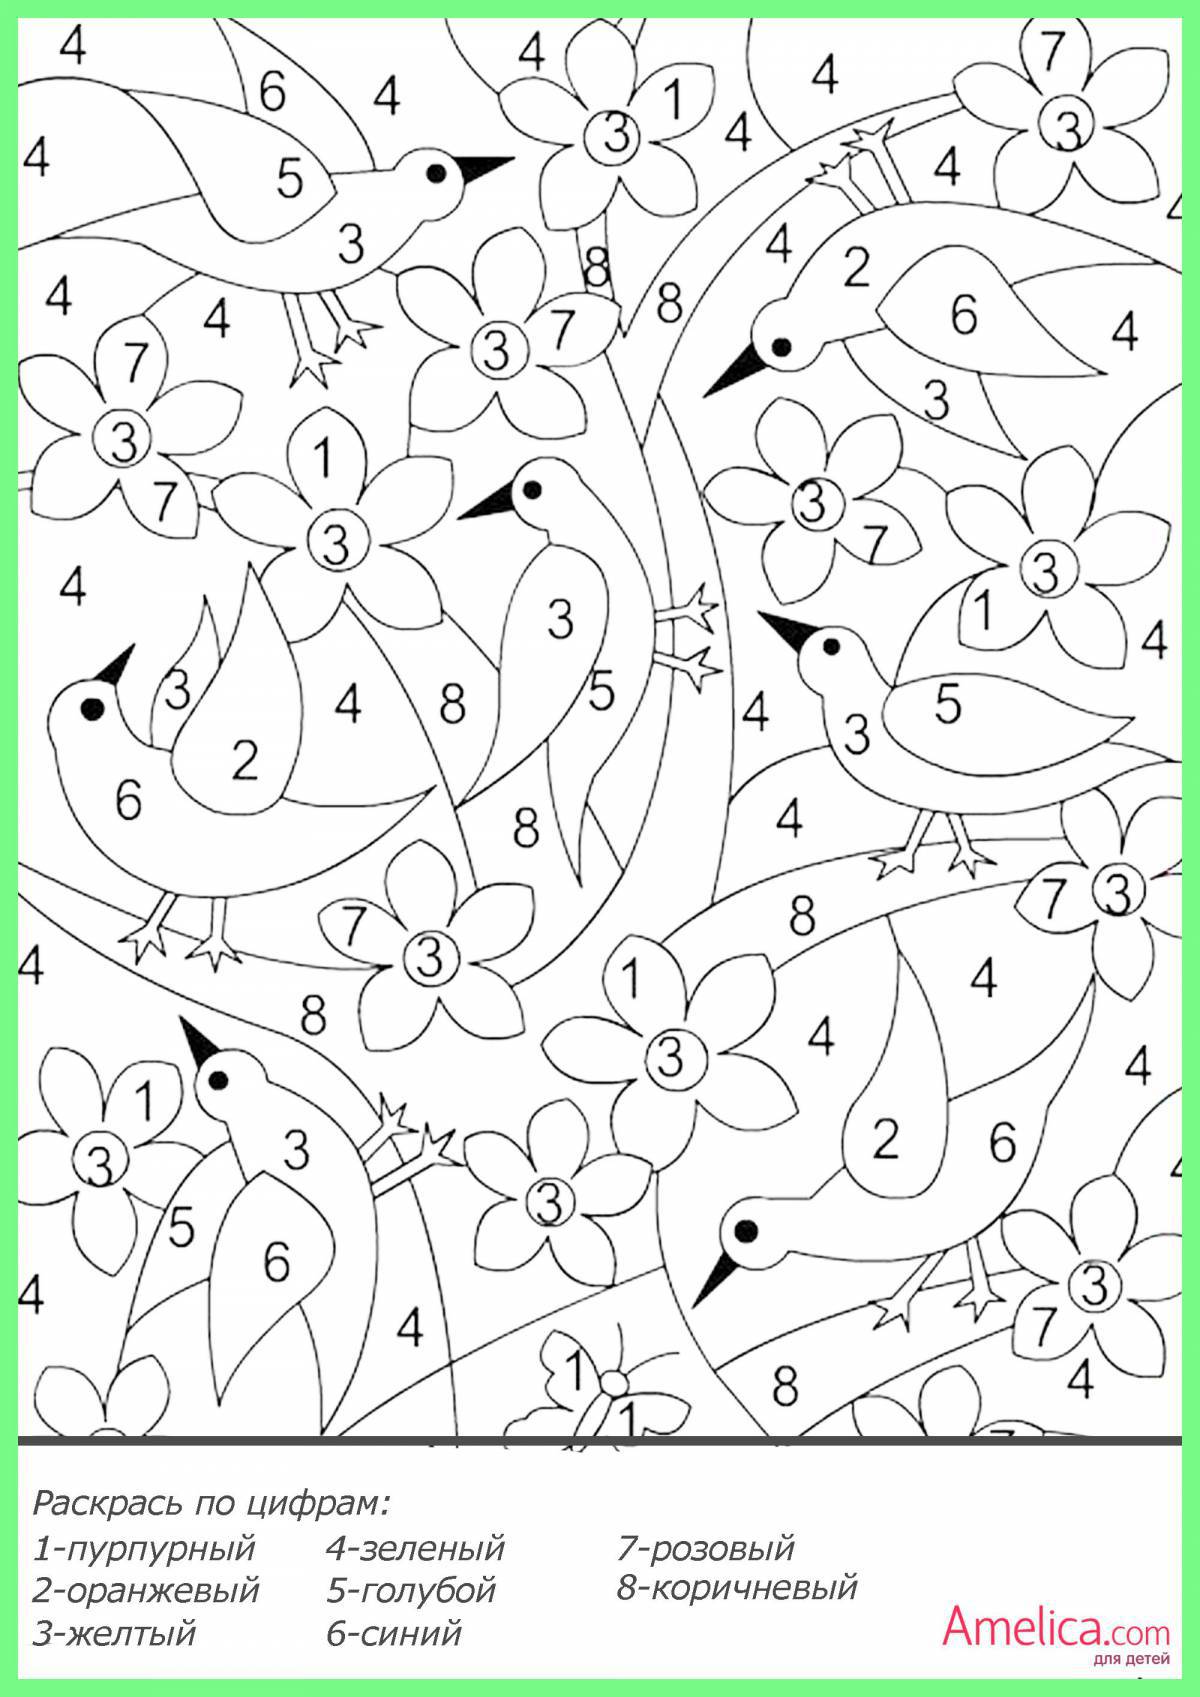 Bright coloring by numbers for children 7 years old